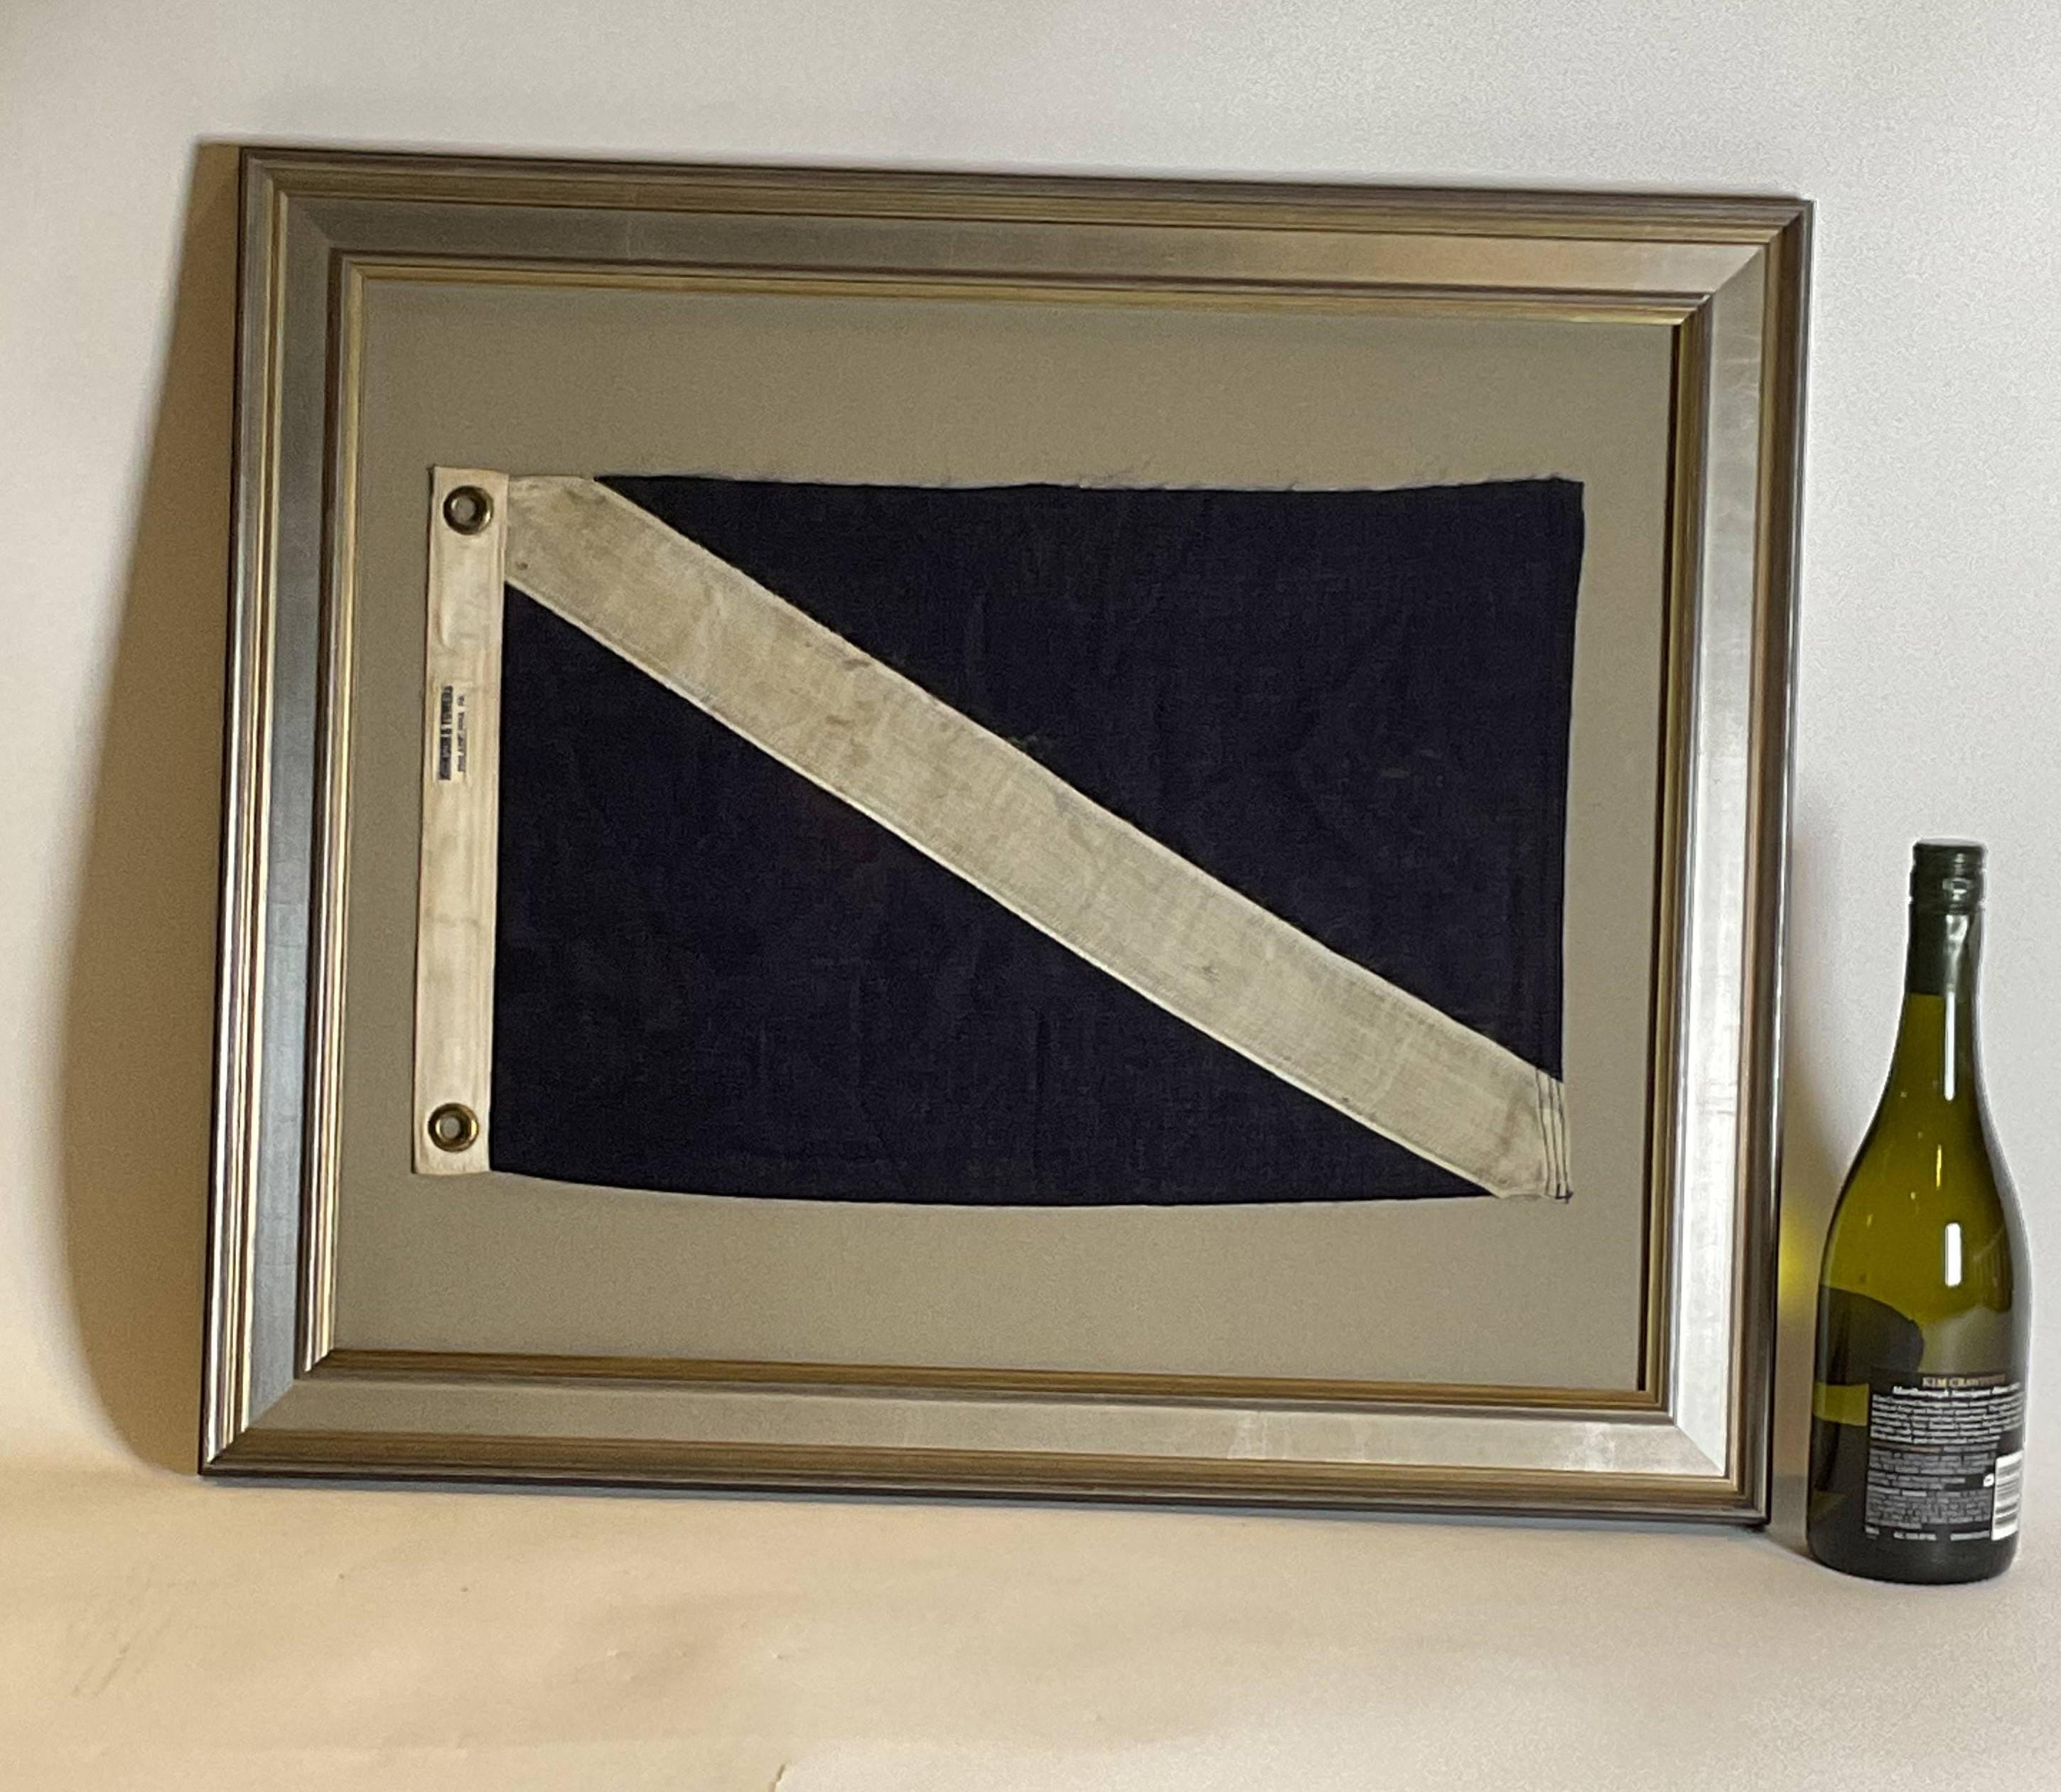 Framed nautical flag flown from dive vessels. This linen flag has a blue filled with white stripe. Canvas hoist with brass grommets. Matted and framed .

Weight: 6 lbs.
Overall Dimensions: 22